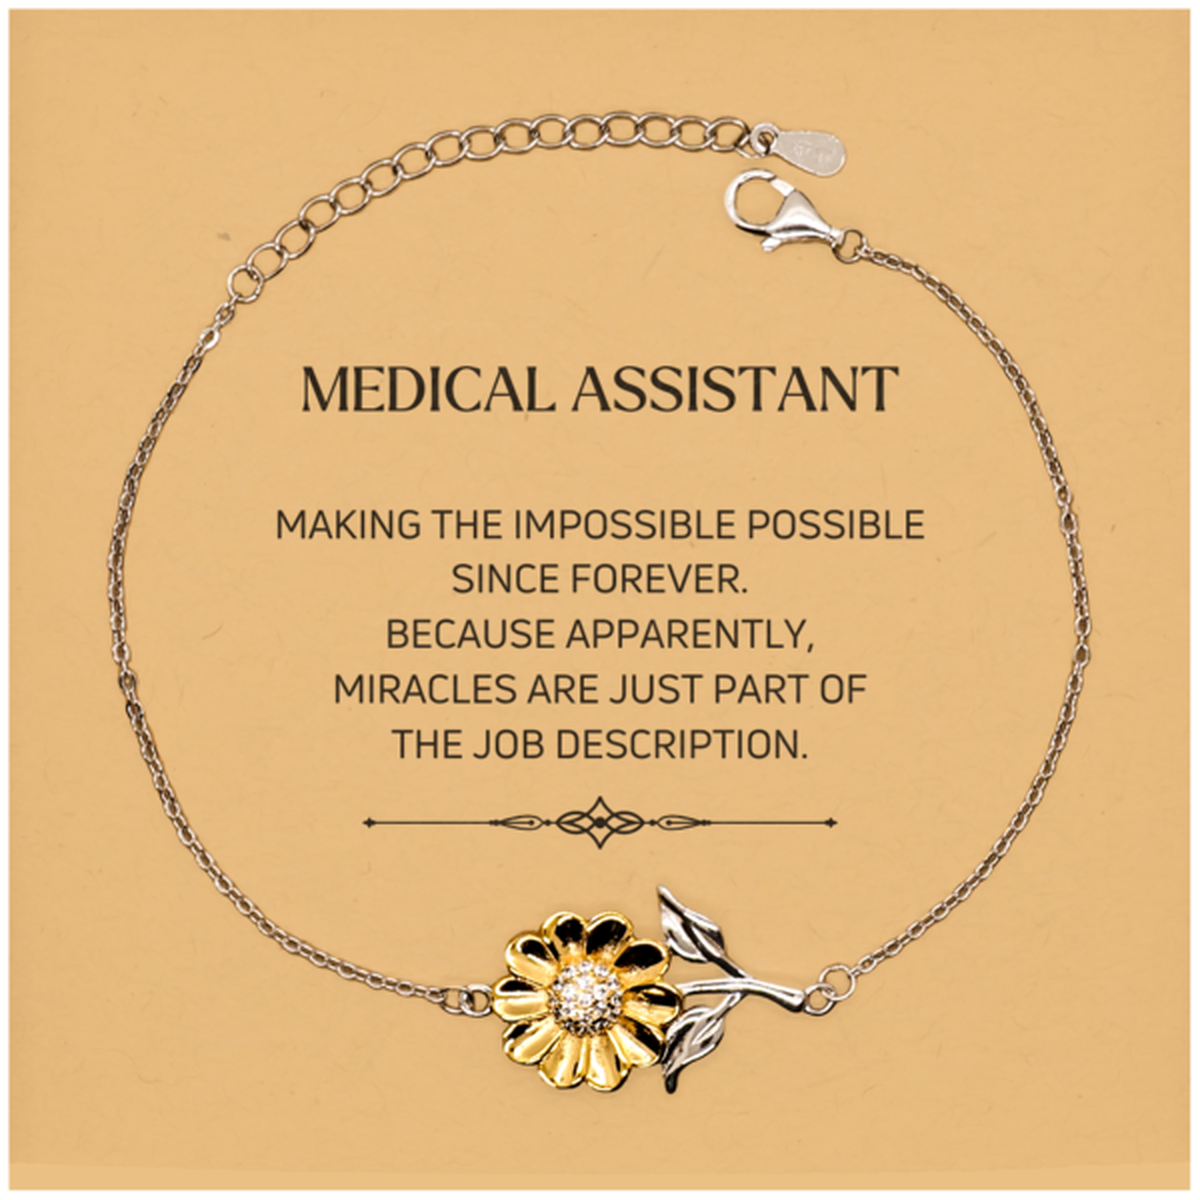 Funny Medical Assistant Gifts, Miracles are just part of the job description, Inspirational Birthday Christmas Sunflower Bracelet For Medical Assistant, Men, Women, Coworkers, Friends, Boss